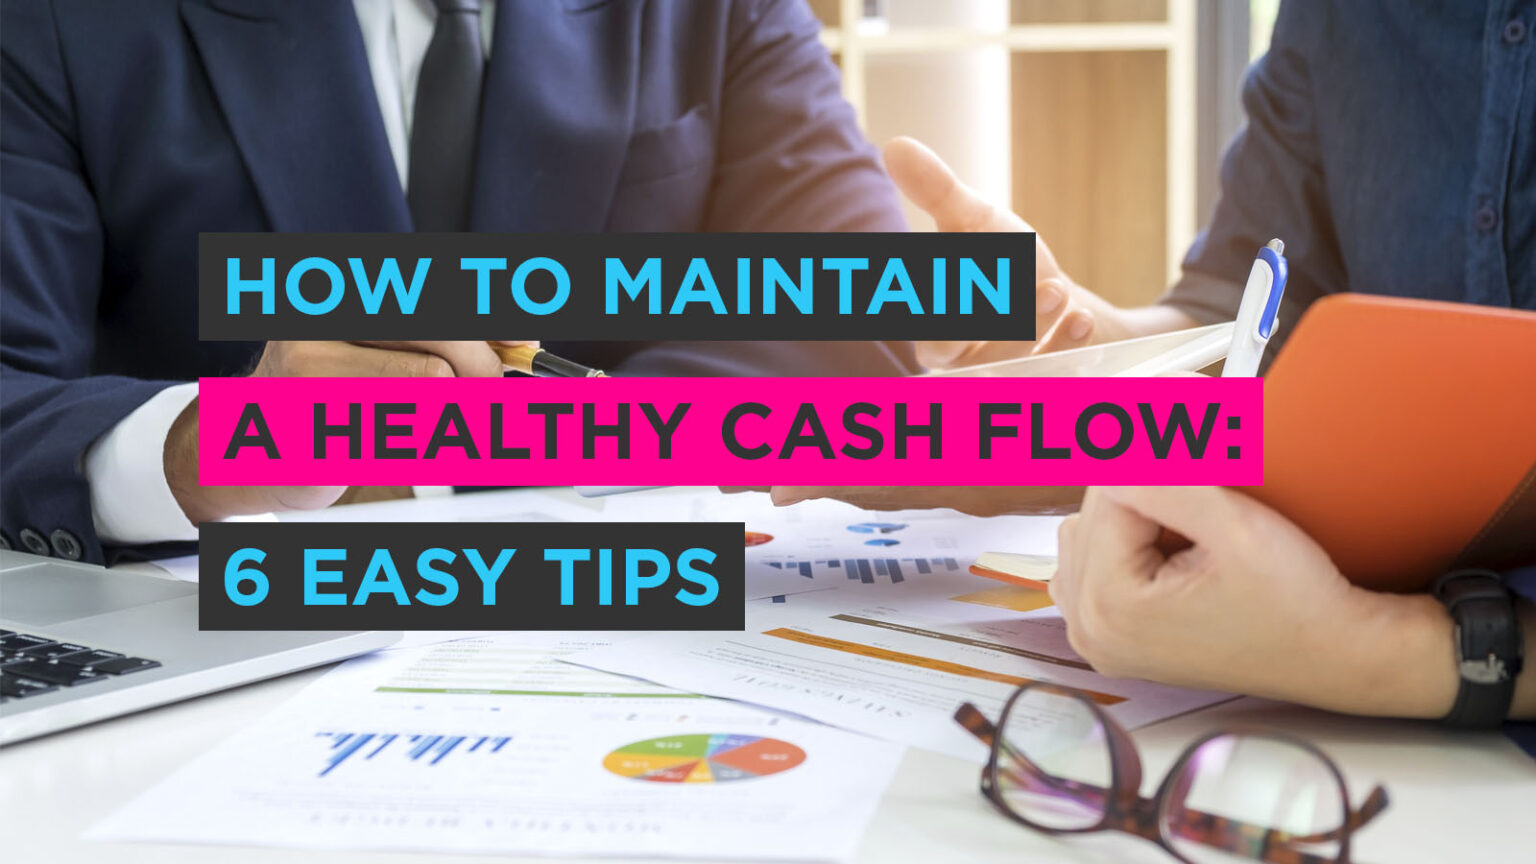 How to Maintain a Healthy Cash Flow: 6 Easy Tips